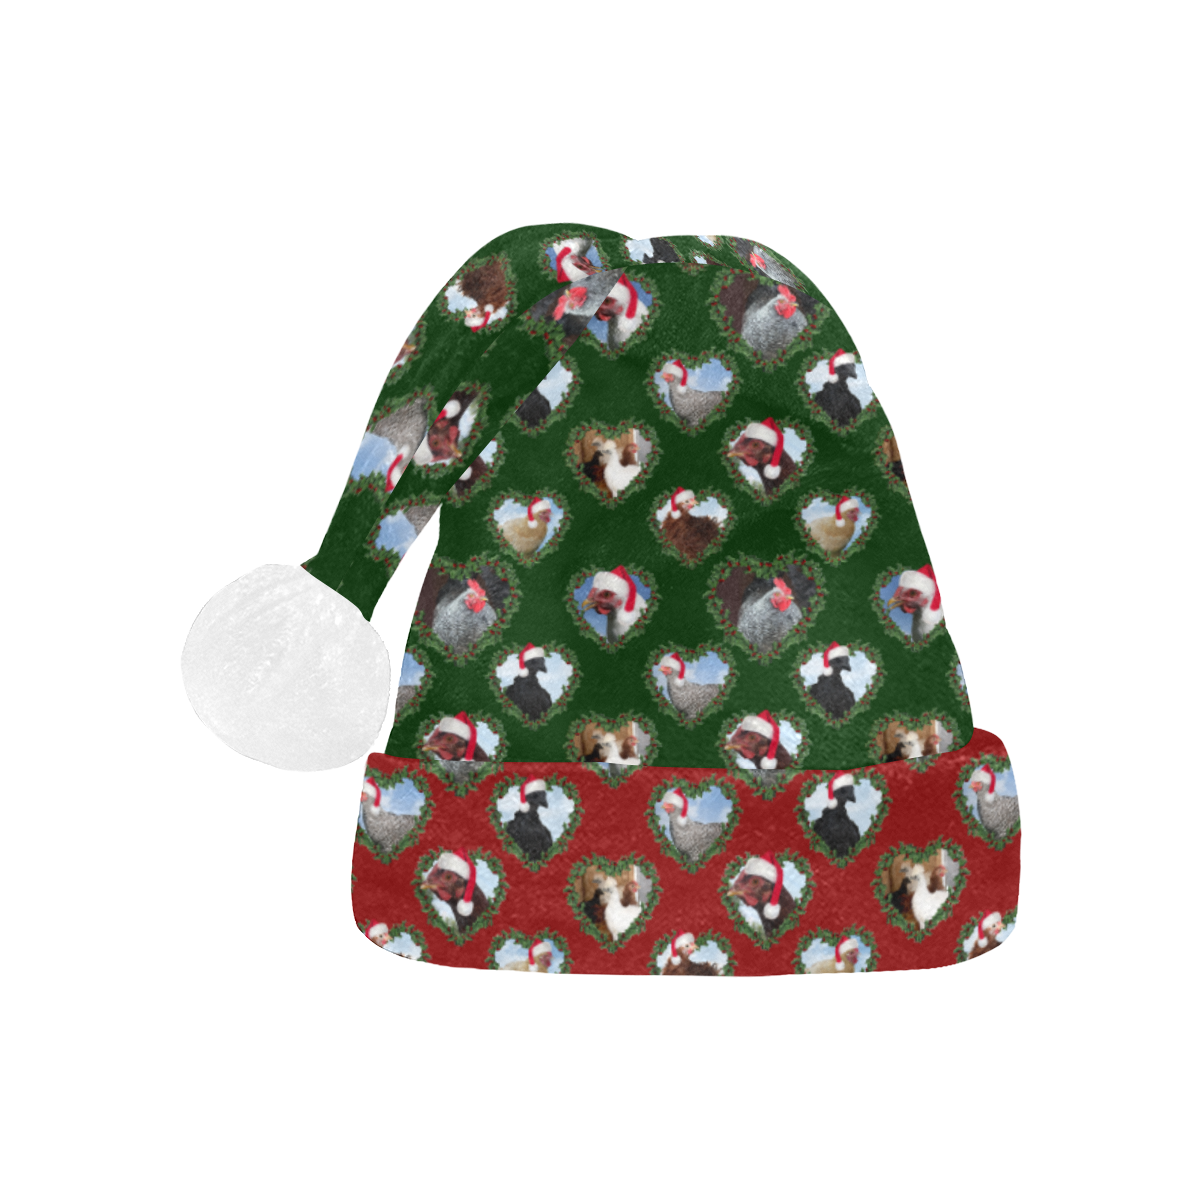 Christmas Chickens in Heart Wreaths Green and Red Santa Hat